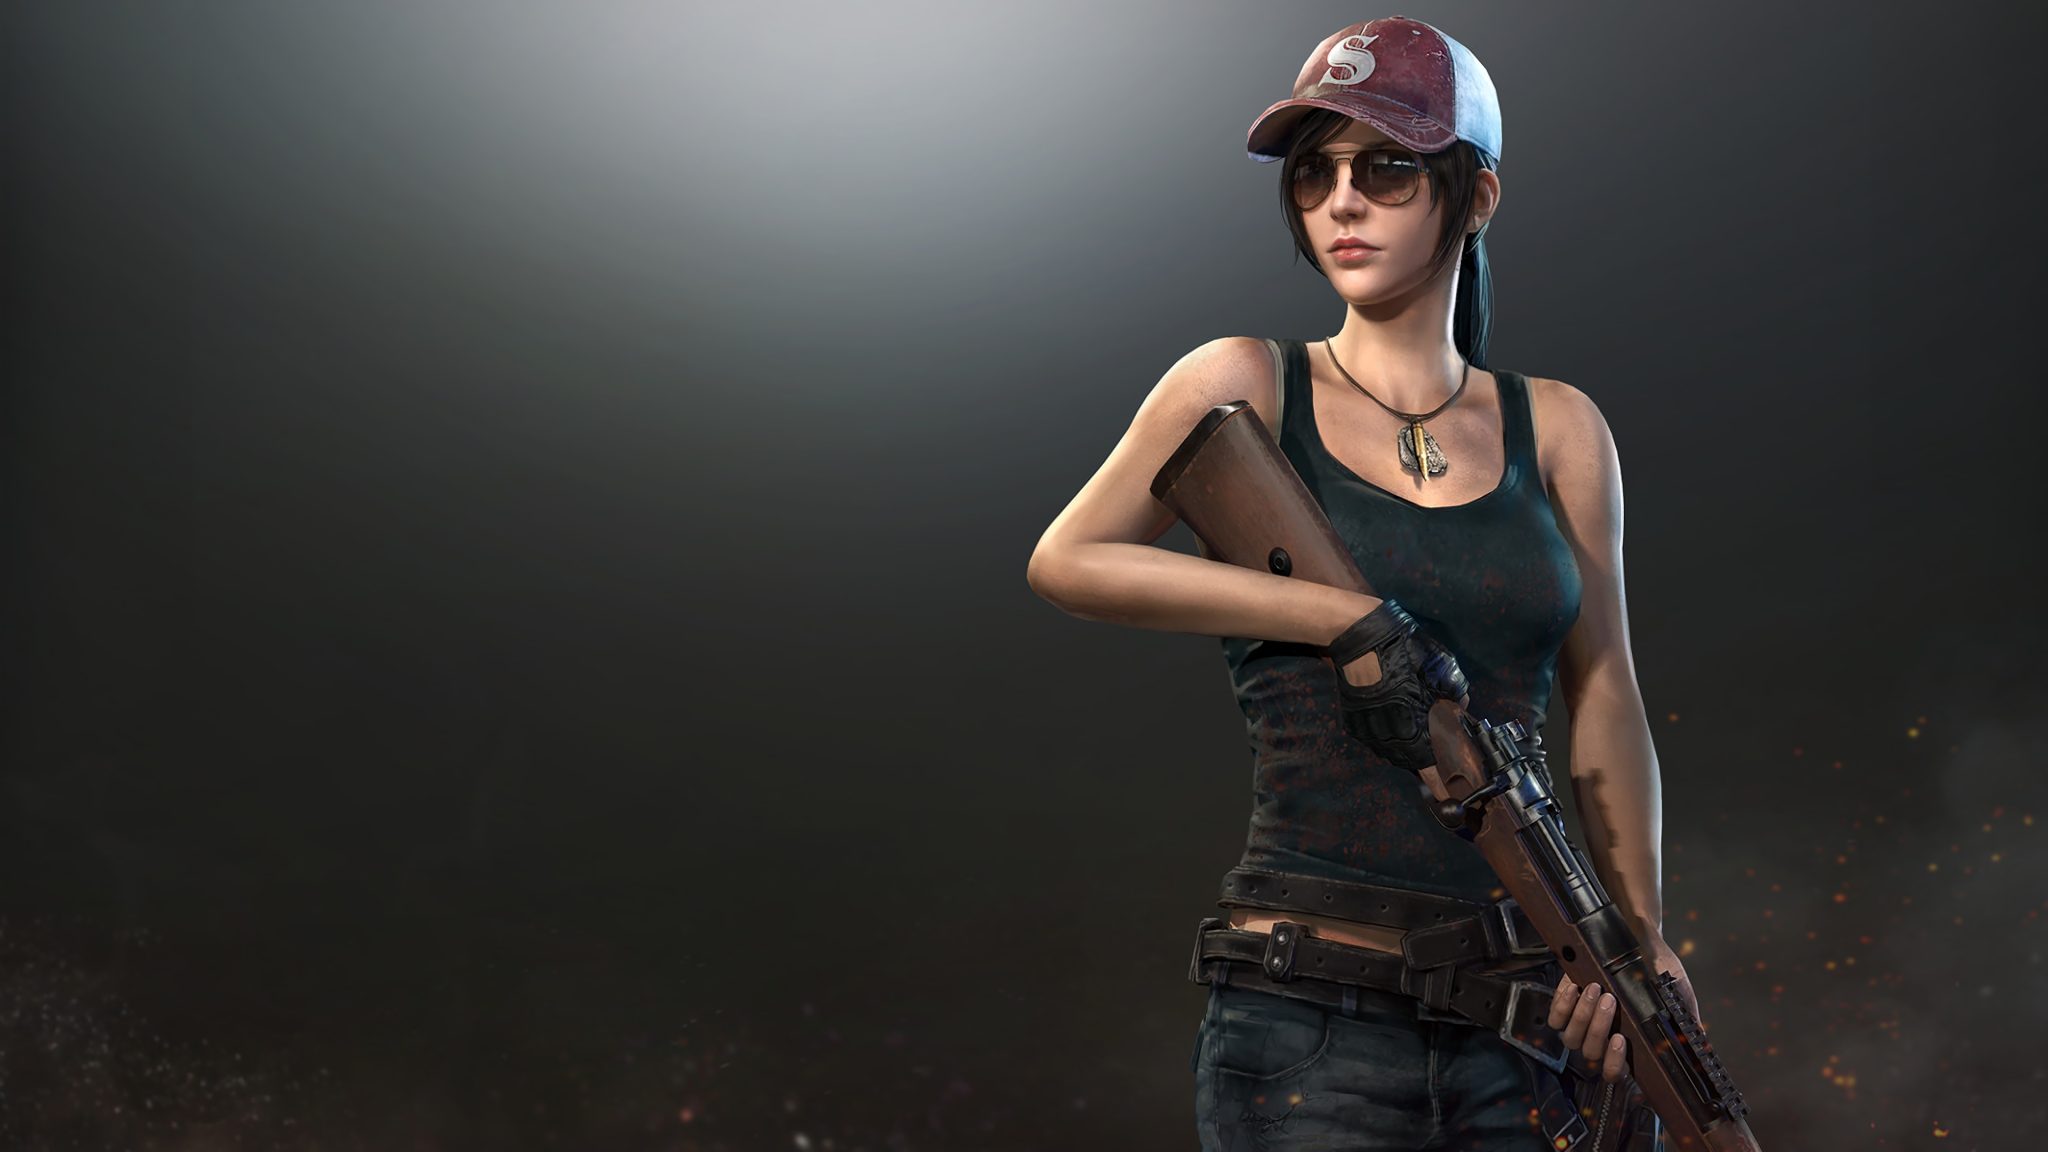 Punjab Police Wants to Ban PUBG Yet Again